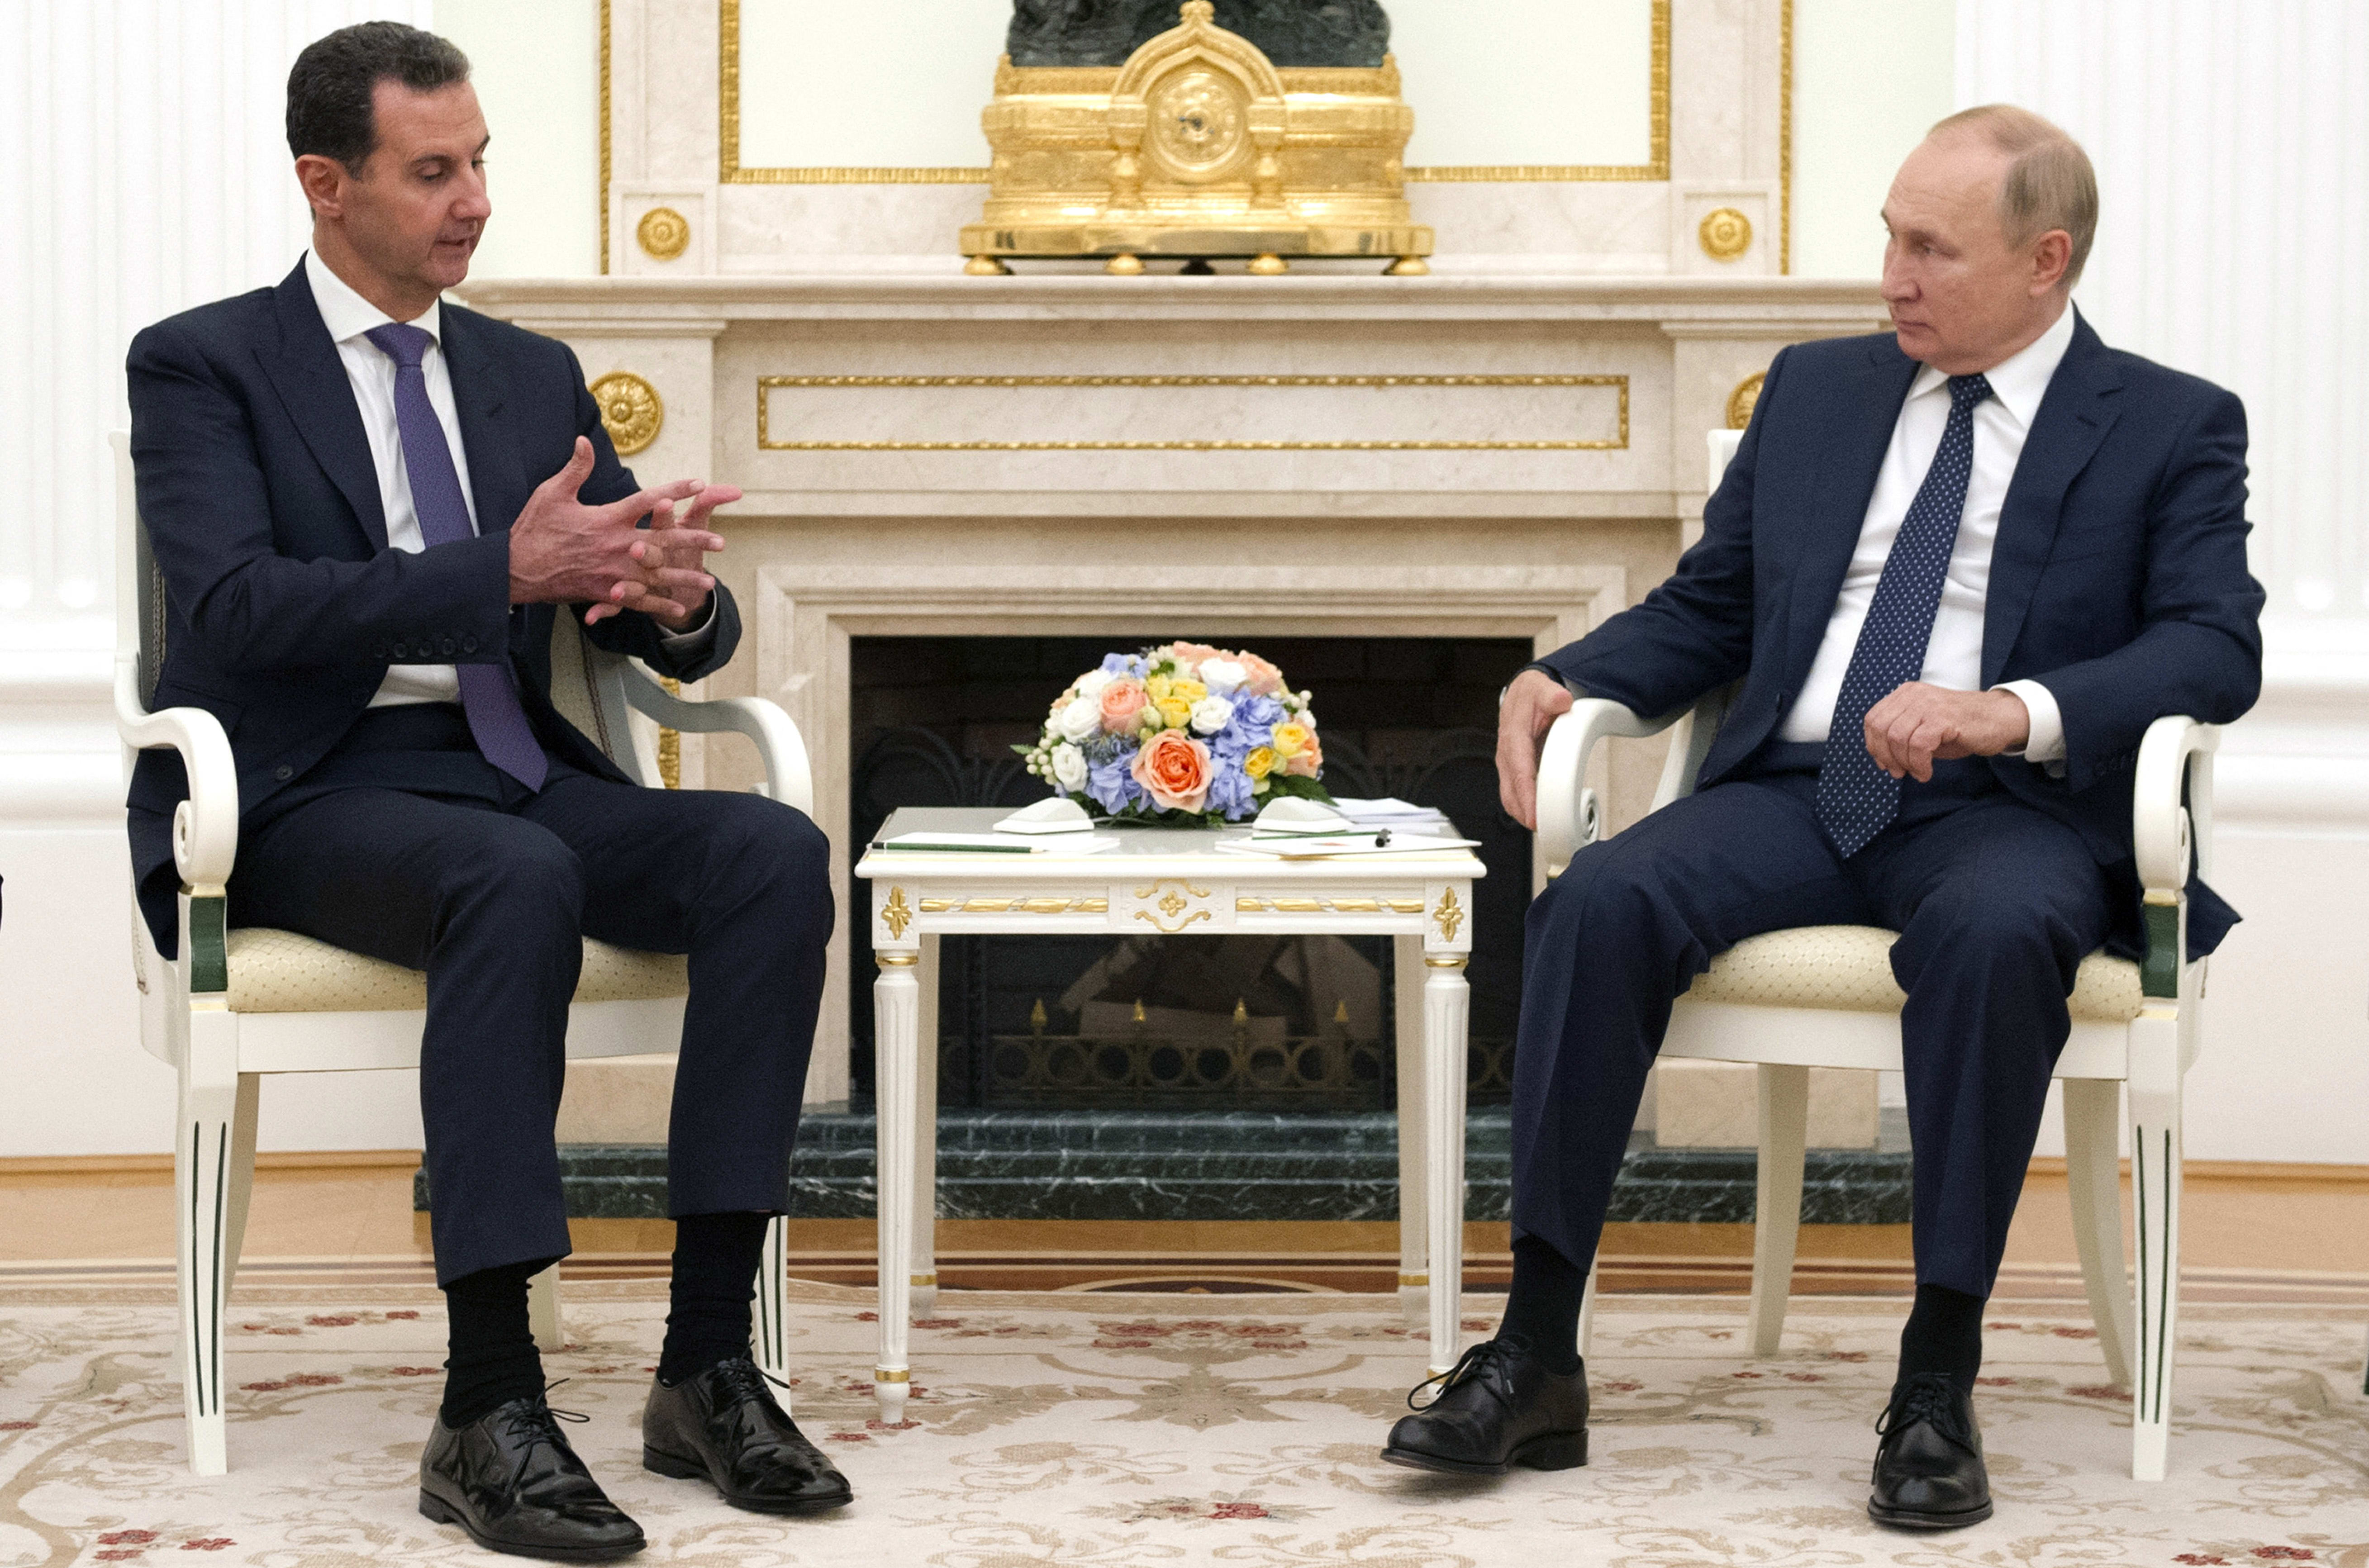 Syrian President Bashar al-Assad, left, talks to Russian President Vladimir Putin during a meeting in Moscow, Russia.